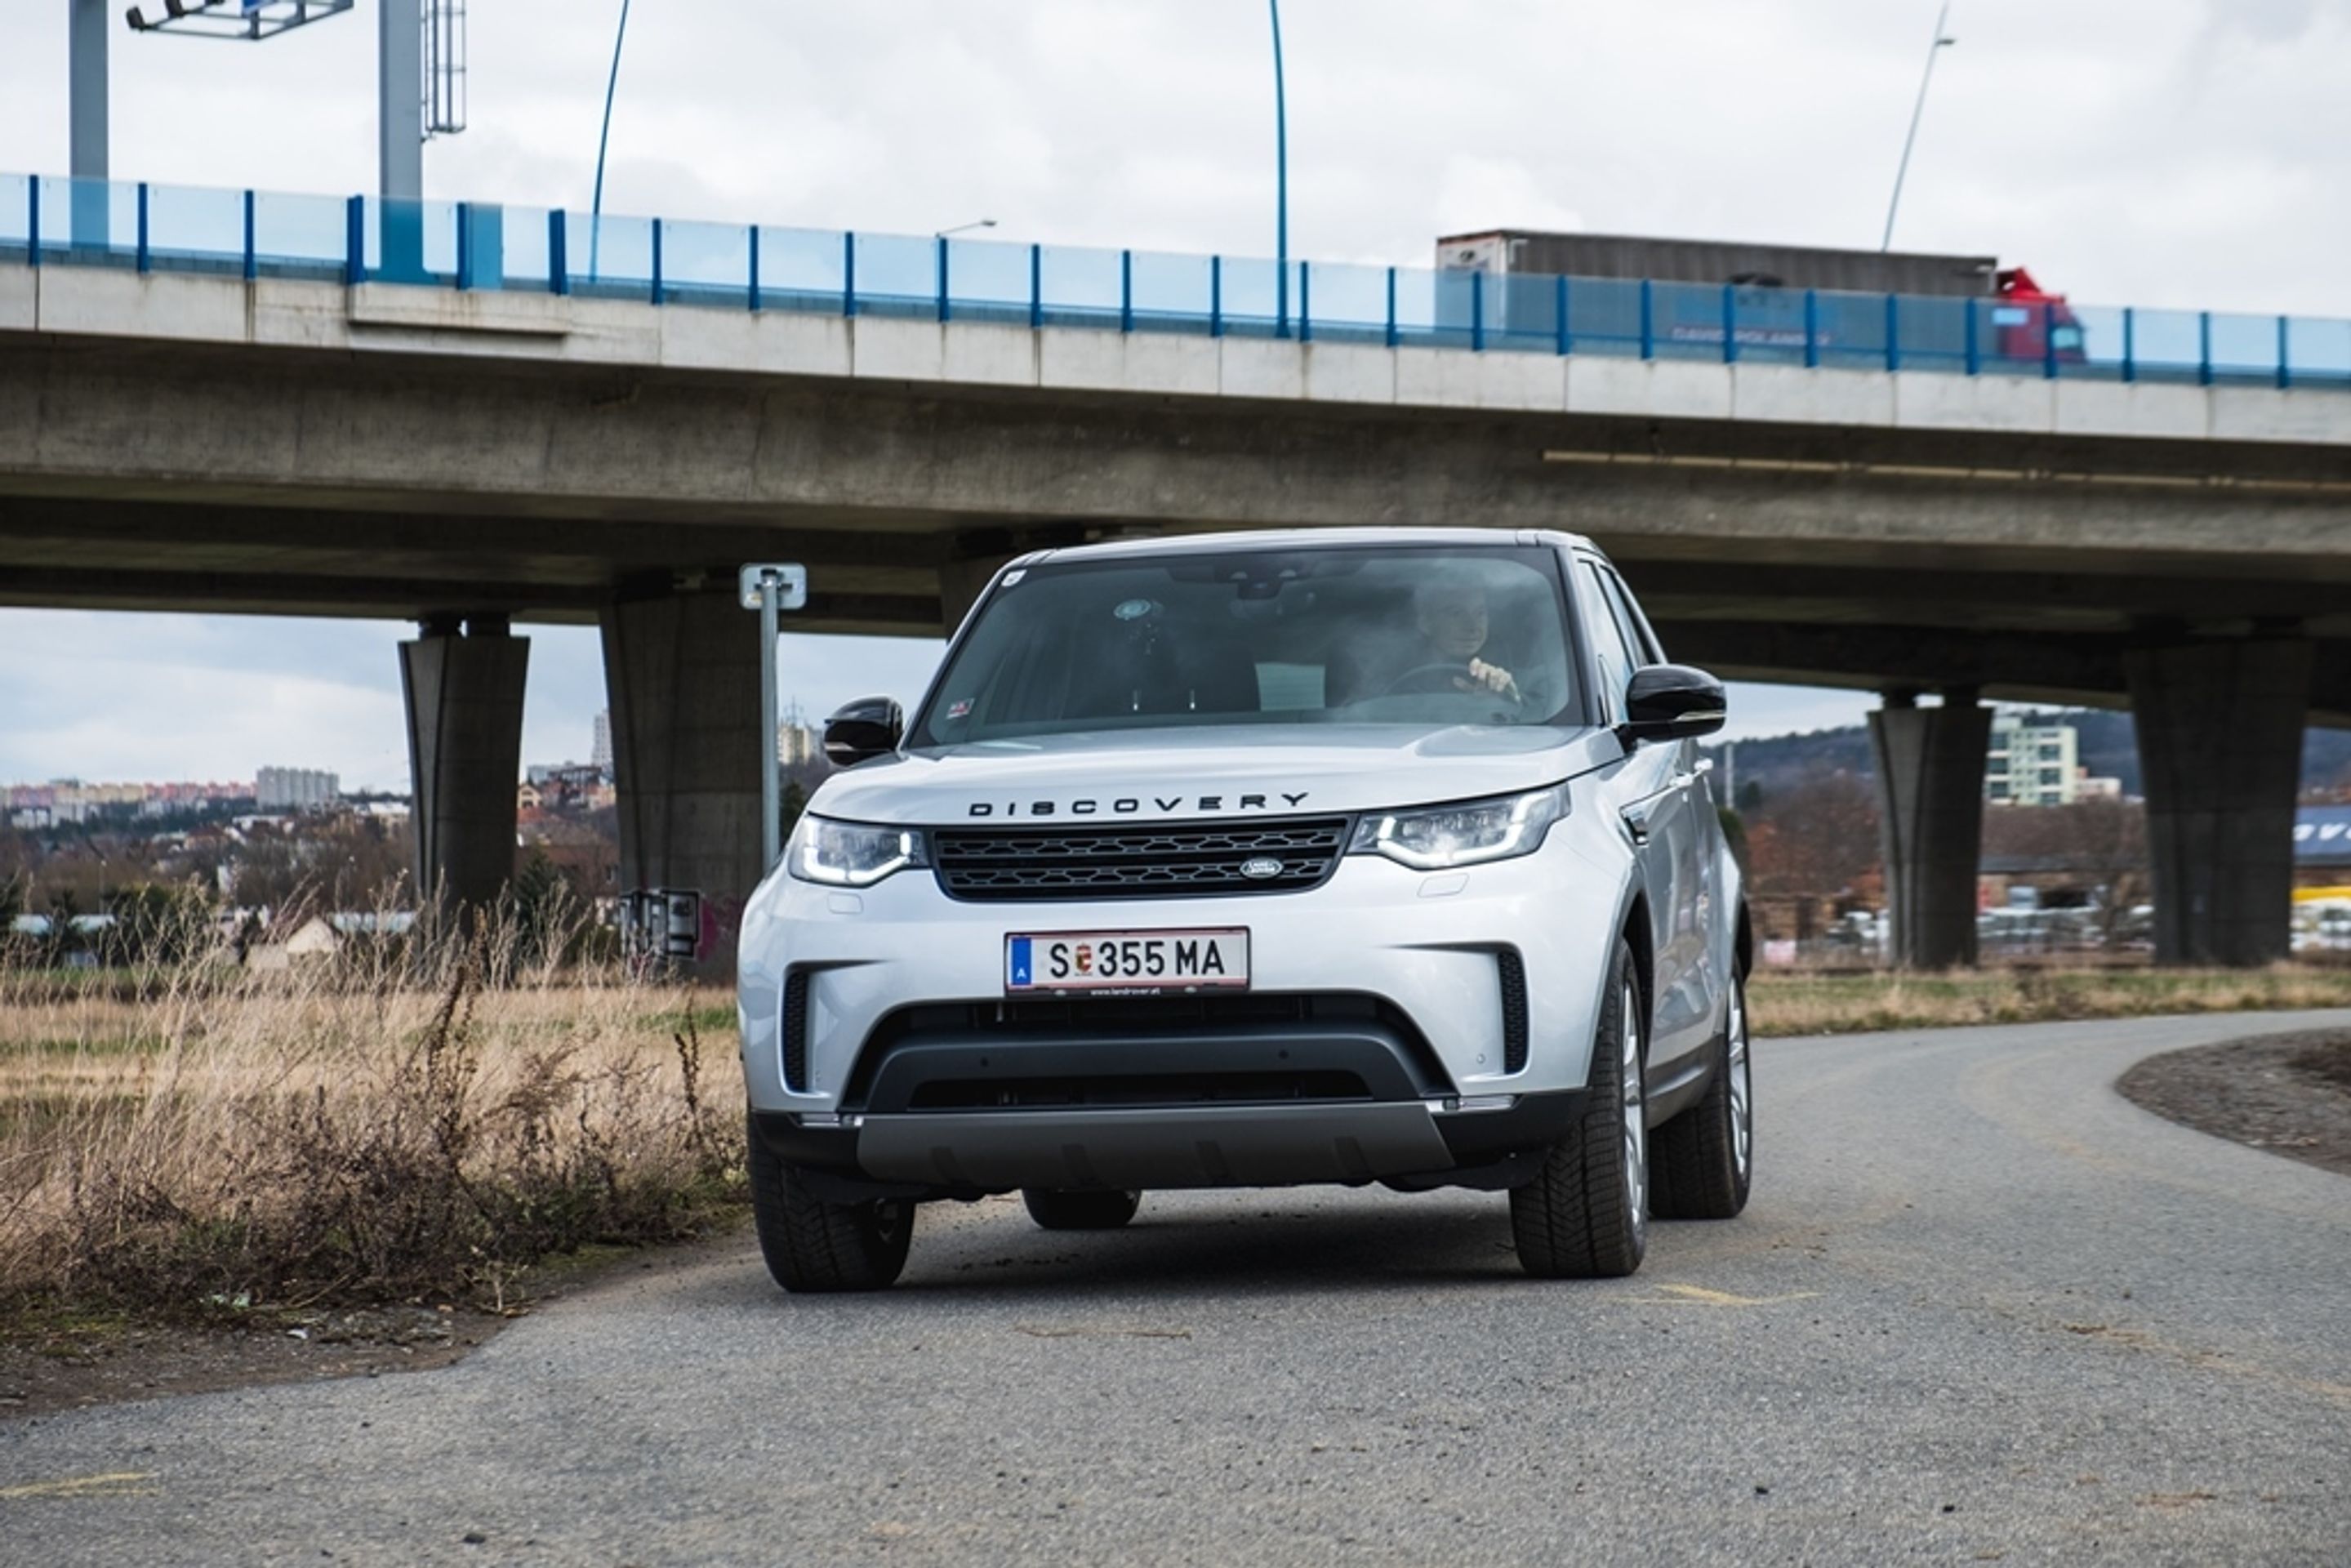 Land Rover - 14 - GALERIE: Land Rover (14/26)